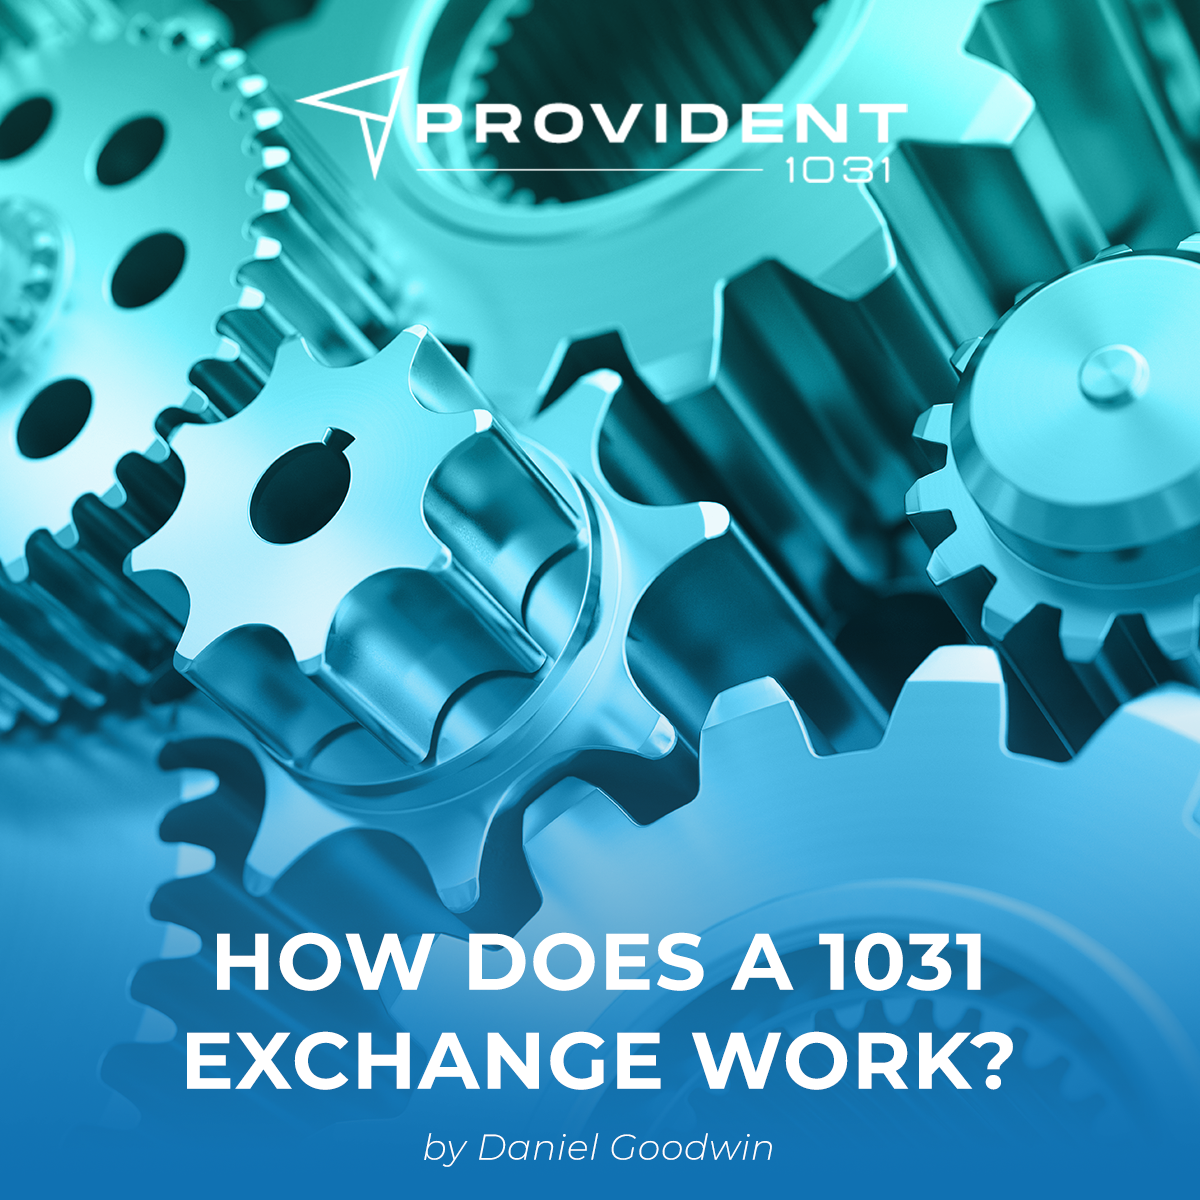 How Does A 1031 Exchange Work? - Provident 1031